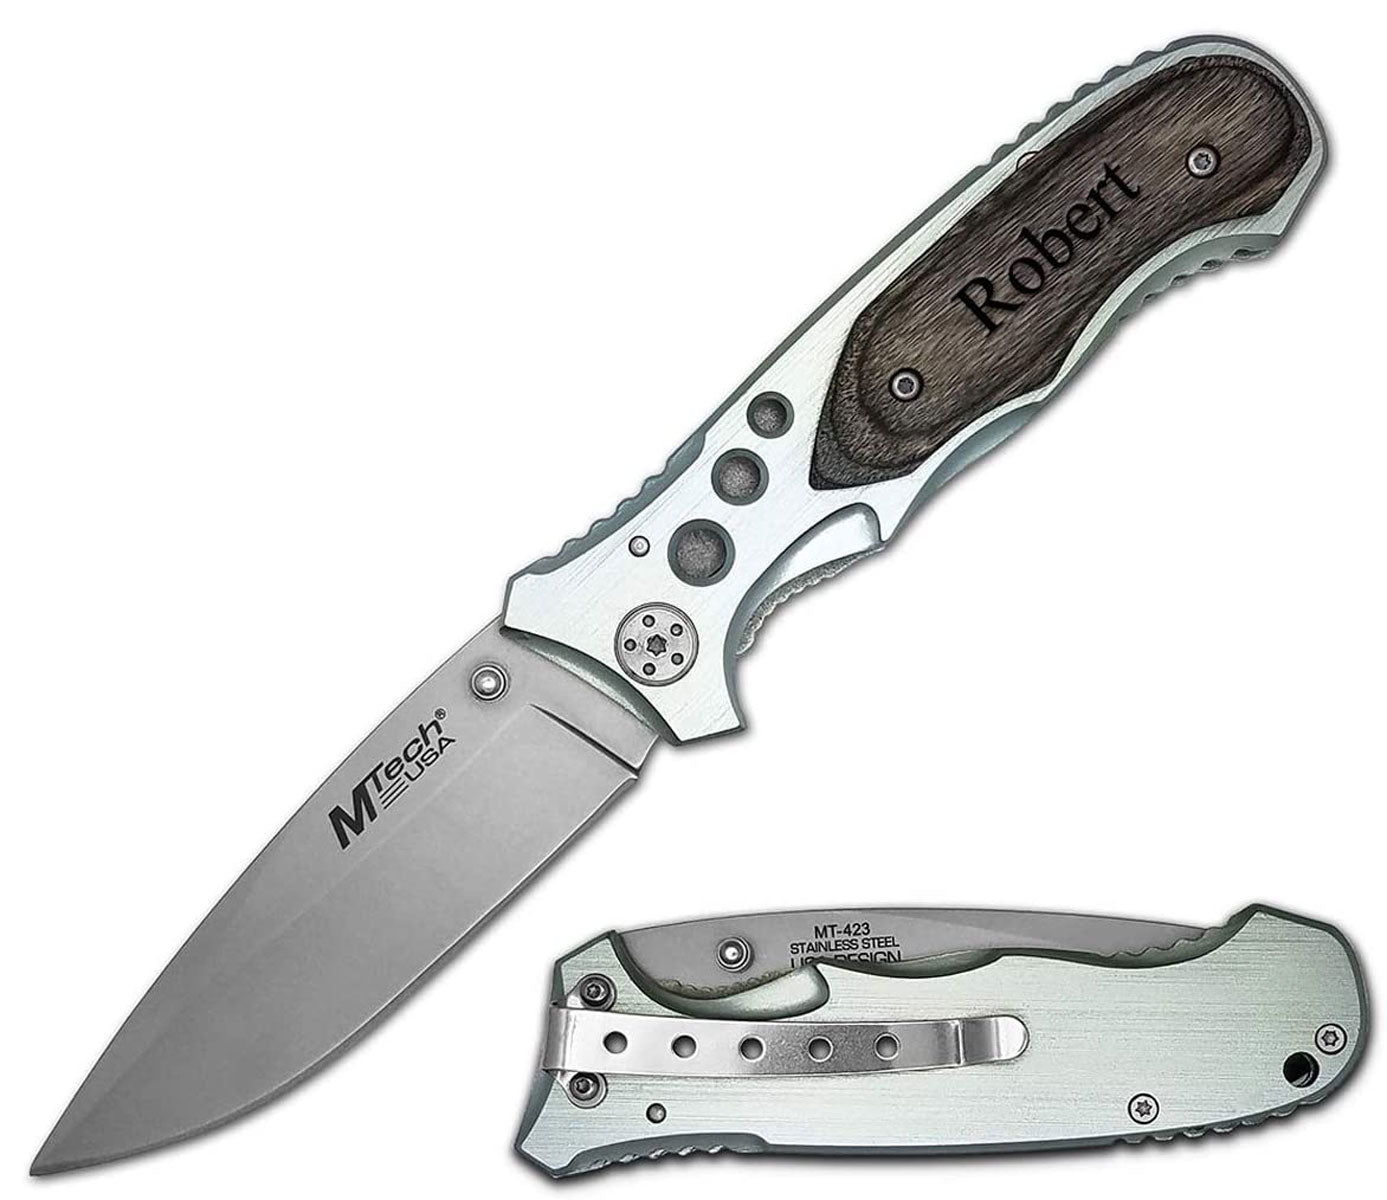 GIFTS INFINITY Personalized Engraved Folding Knife 4.5" Closed, 3MM Thick Sharp Blade With Pocket Clip